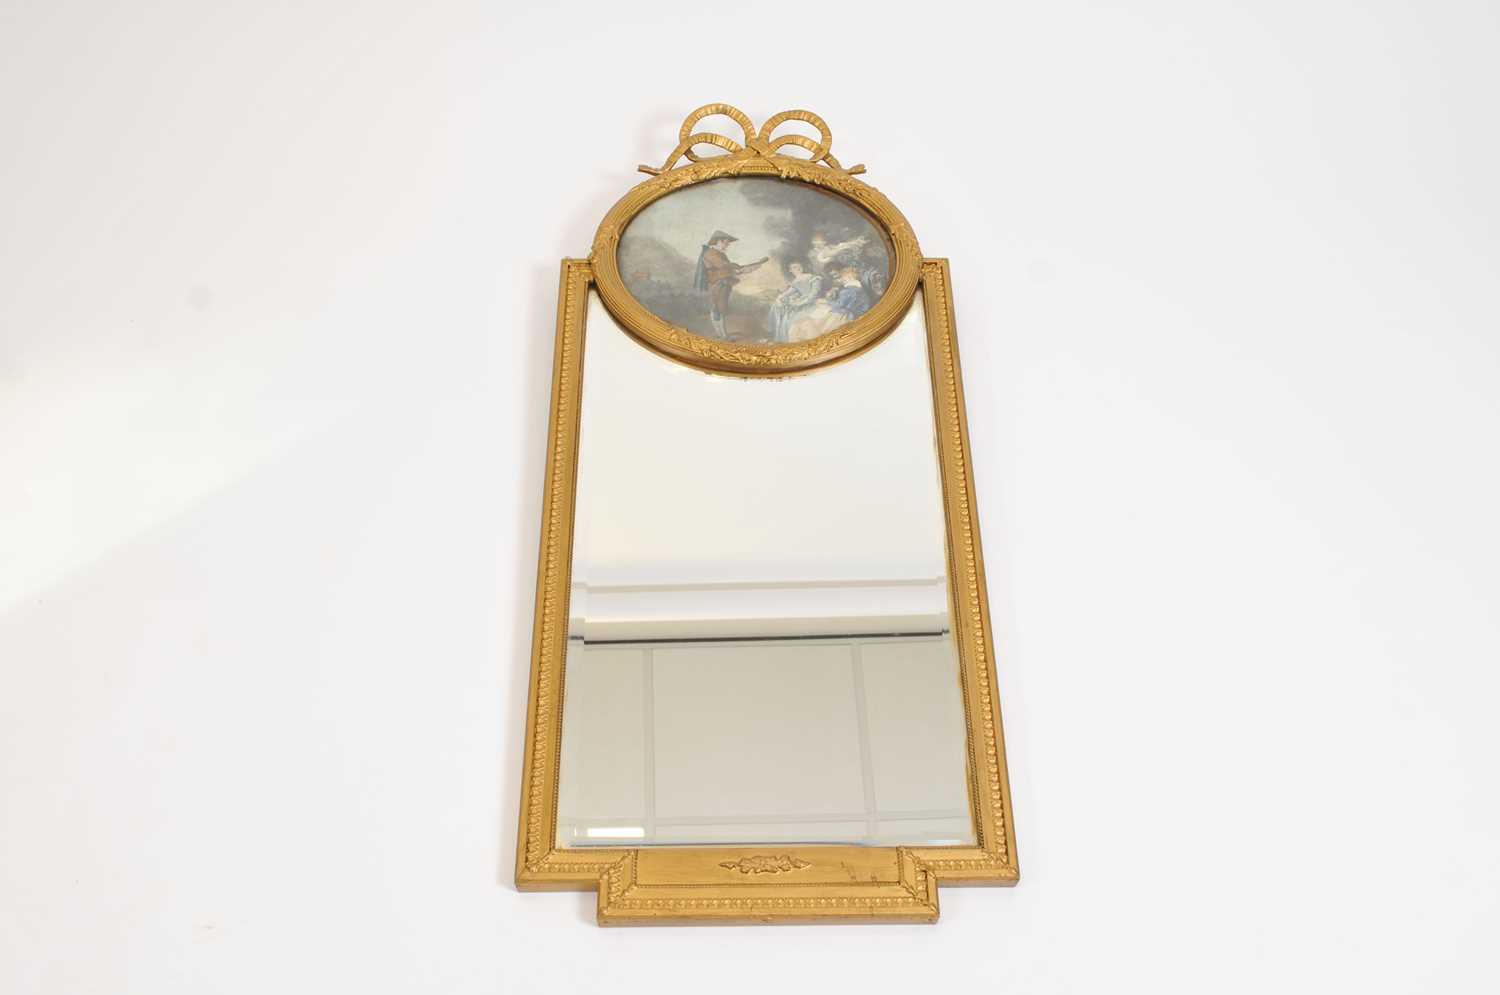 A decorative early 20th century French pier glass